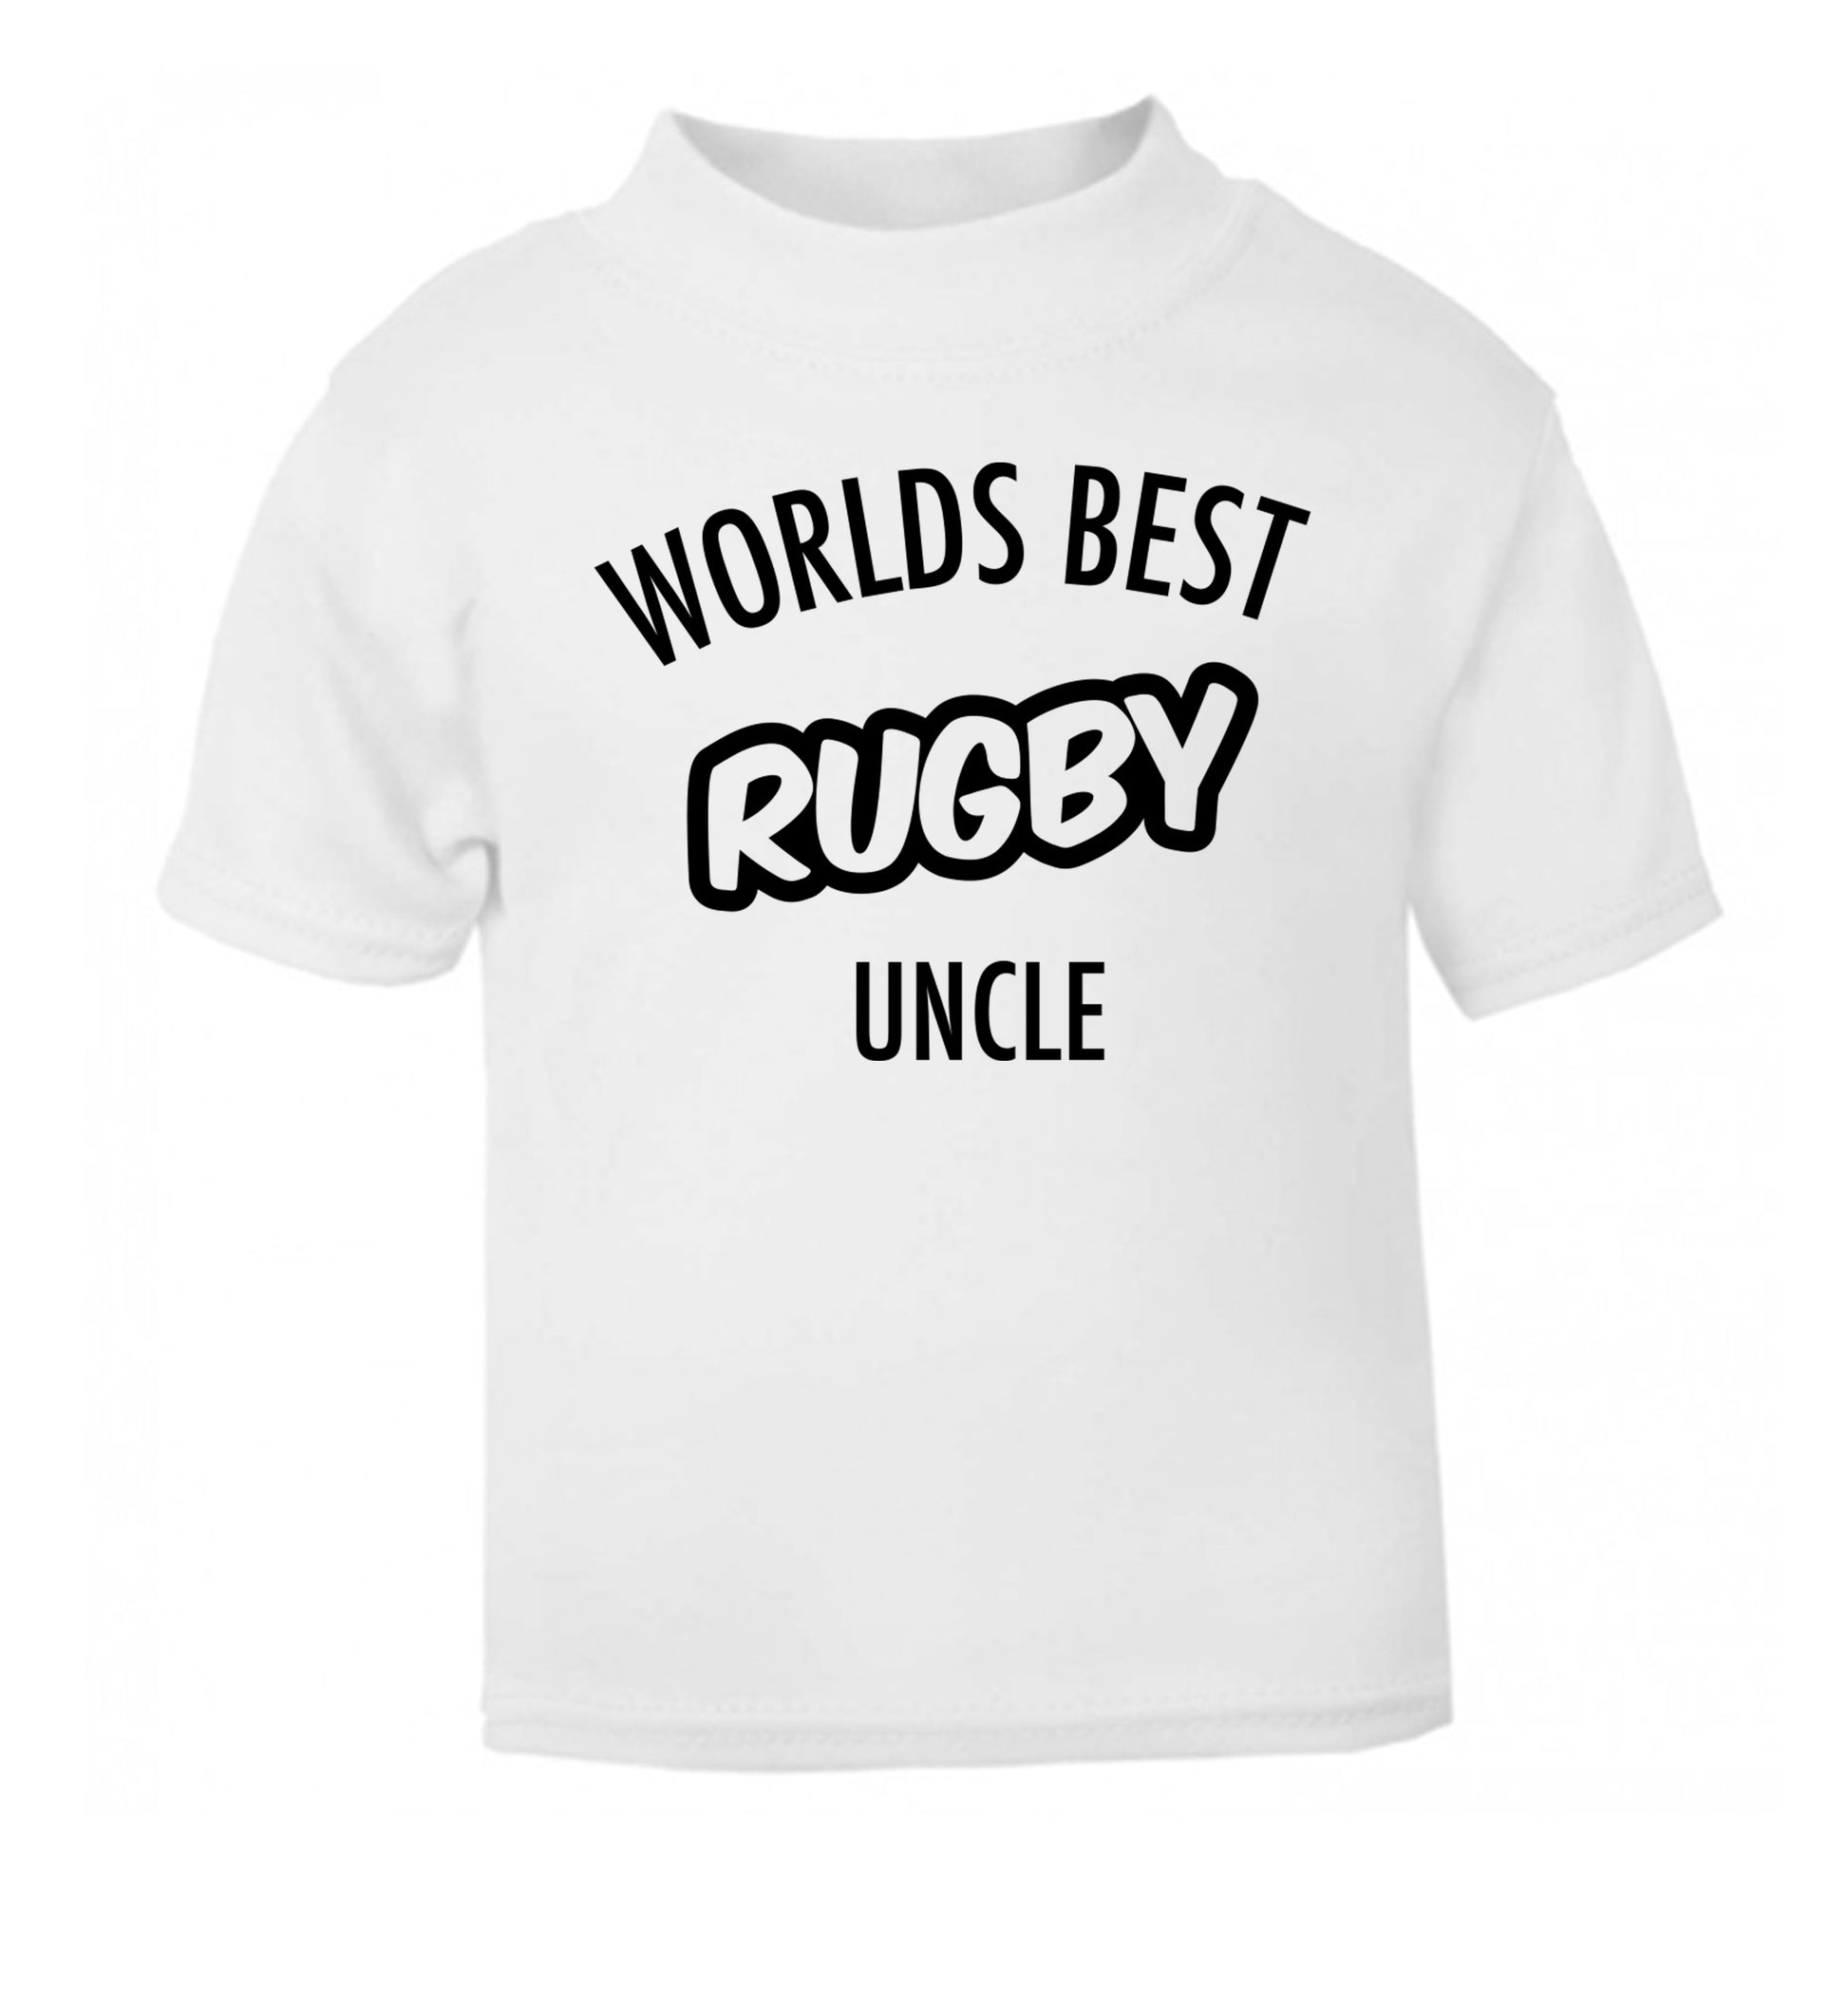 Worlds best rugby uncle white Baby Toddler Tshirt 2 Years